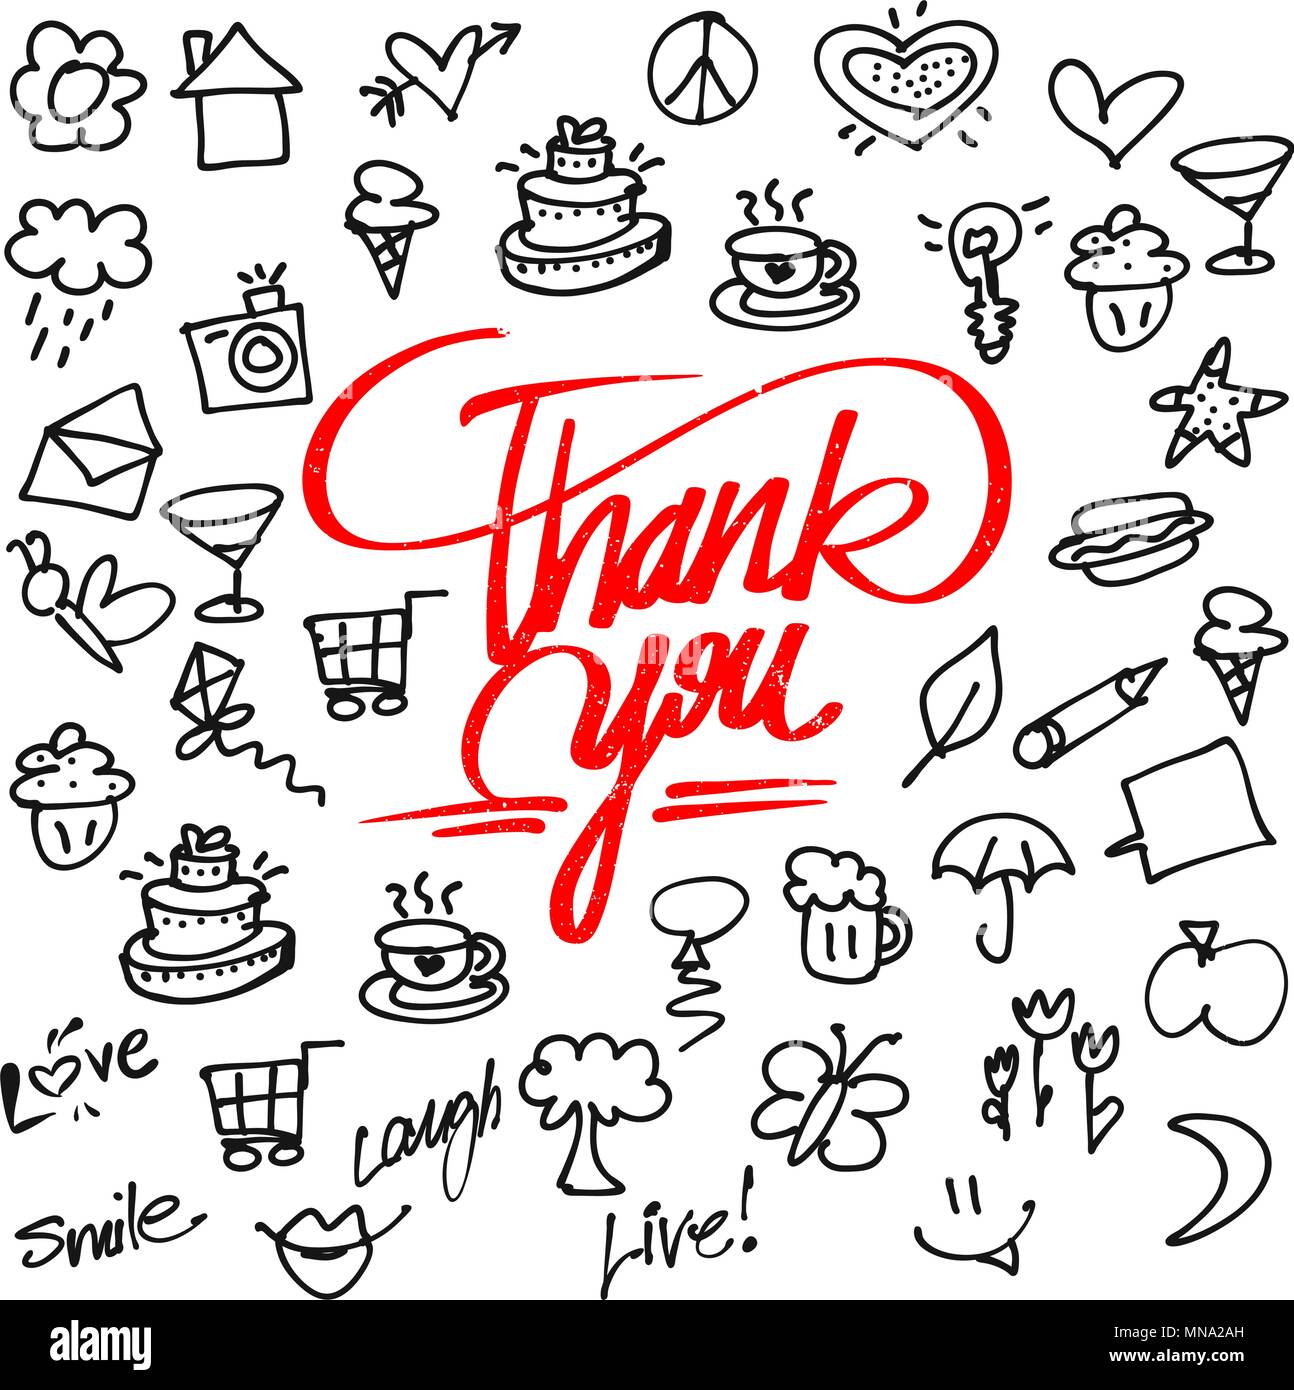 Thank you letter Typo and Icons, Hand drawn Vector Calligraphy Greeting Card Concept Stock Vector